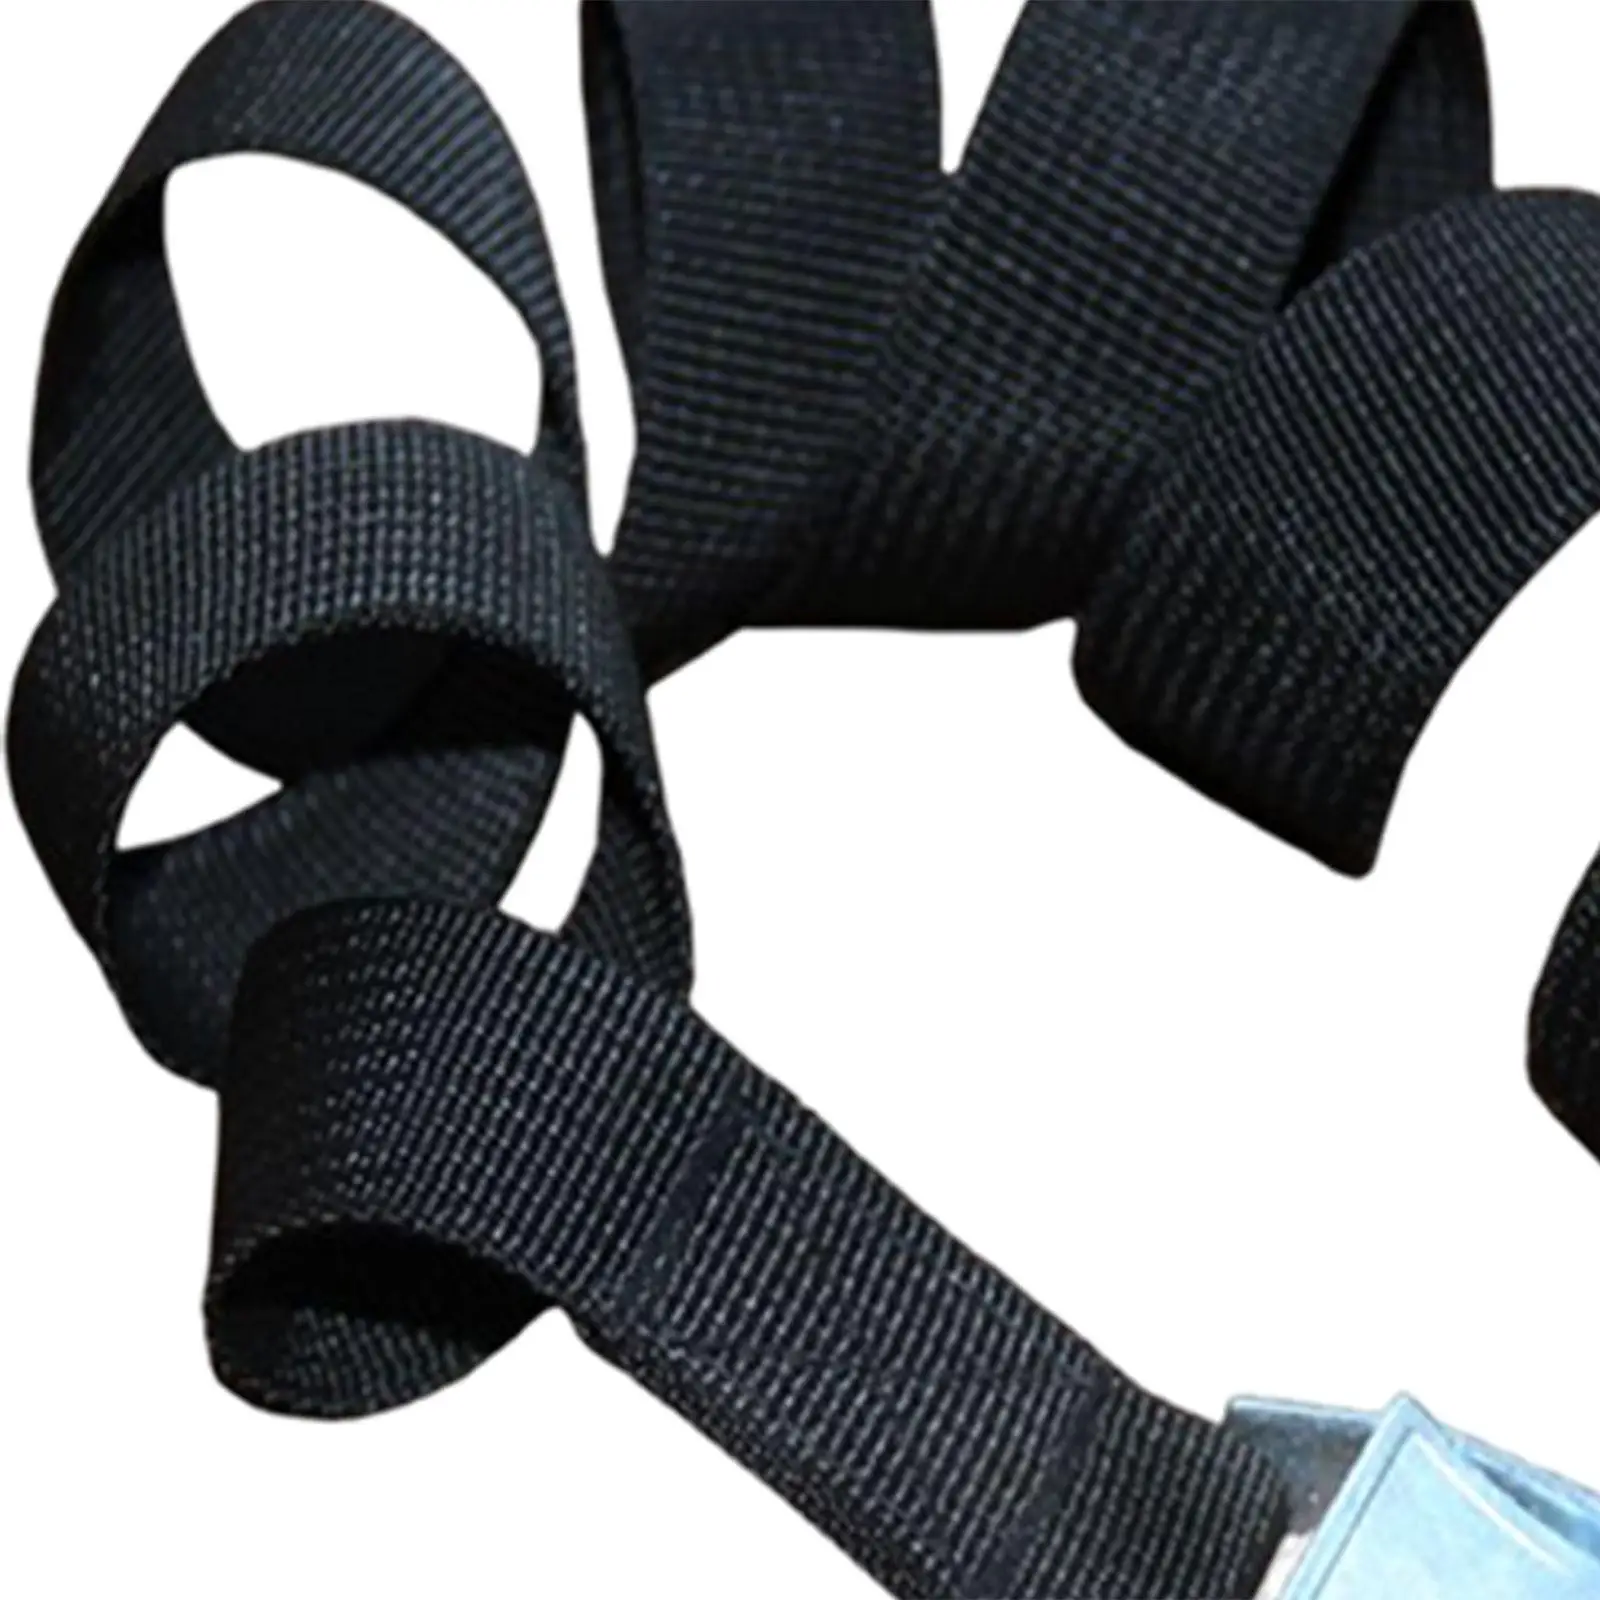 5x Tie Down Strap with Buckle Lashing Straps Heavy Duty Tensioner Luggage Fixing Straps for Roof Rack Travel Fixing